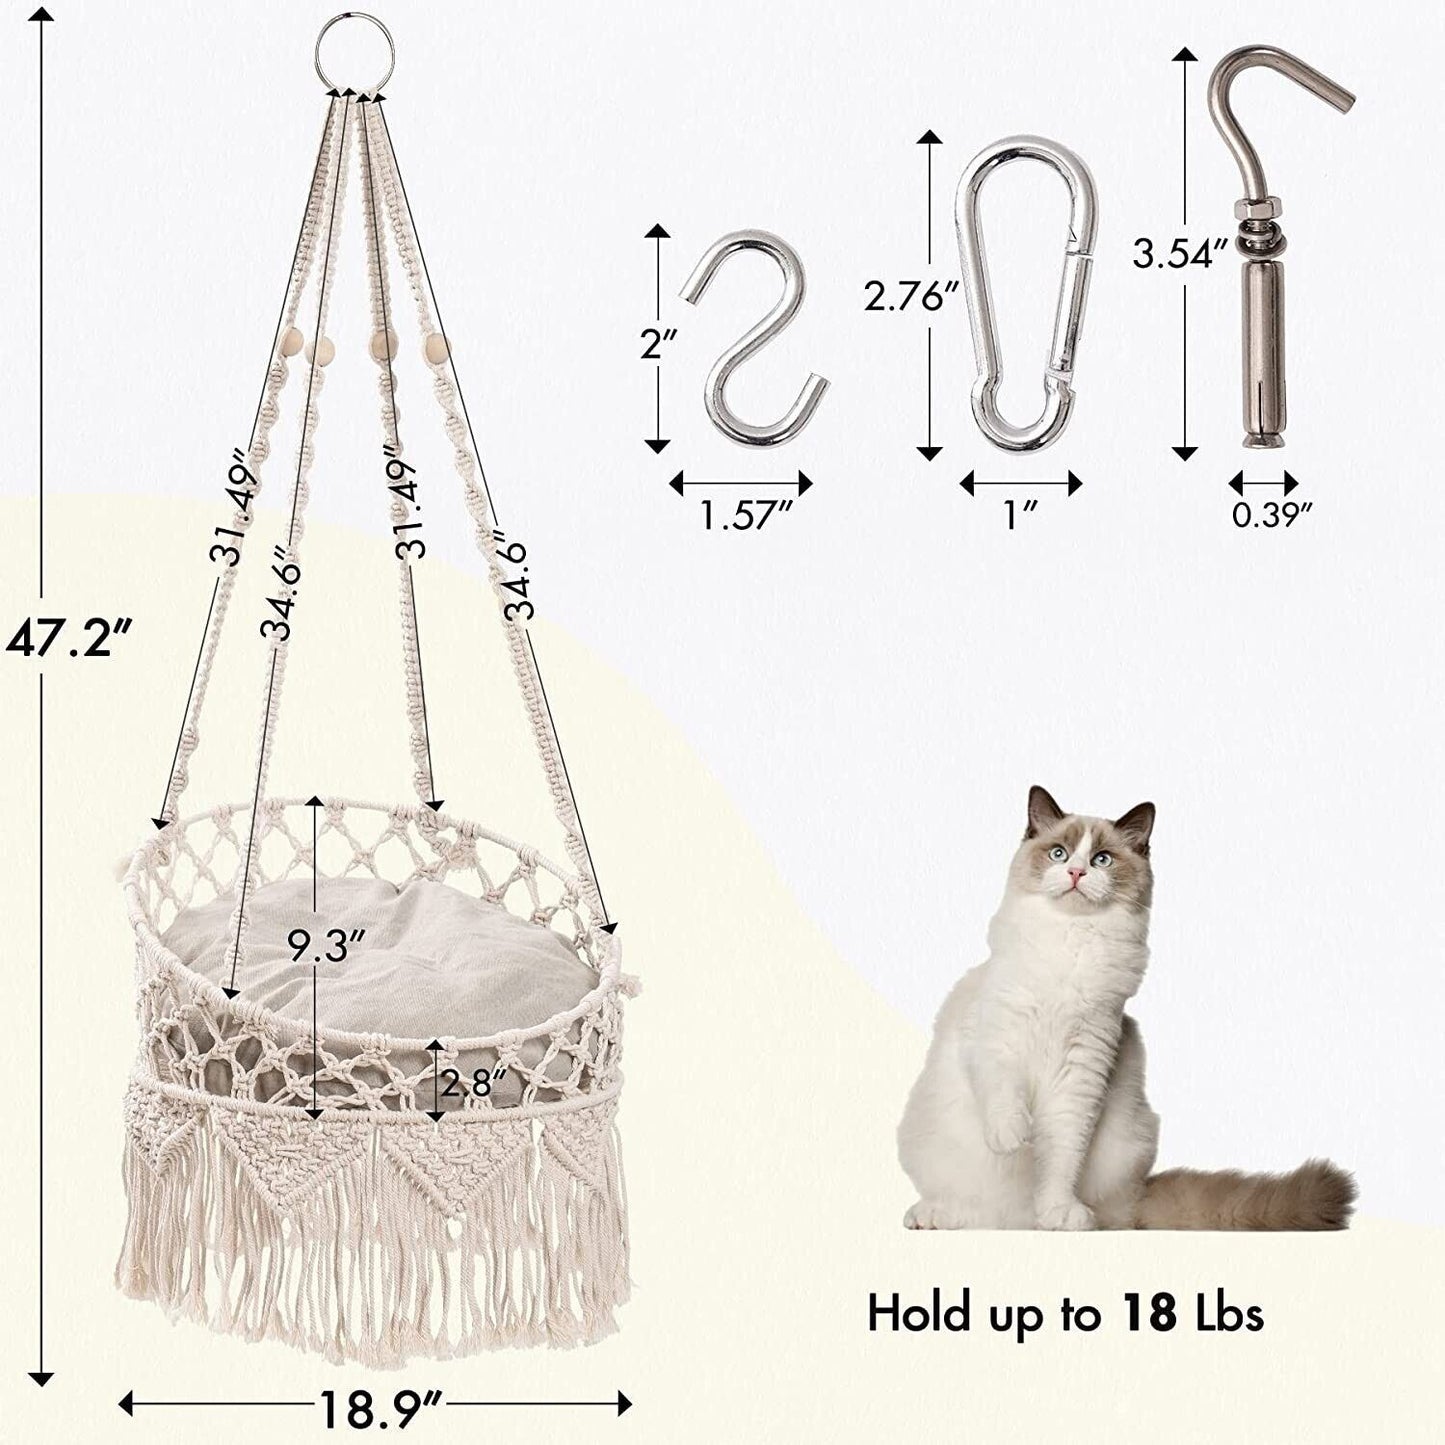 Mewoofun Cat Hammock Bed Cotton Hanging Cat Bed for Indoor Cats Sleeping Playing